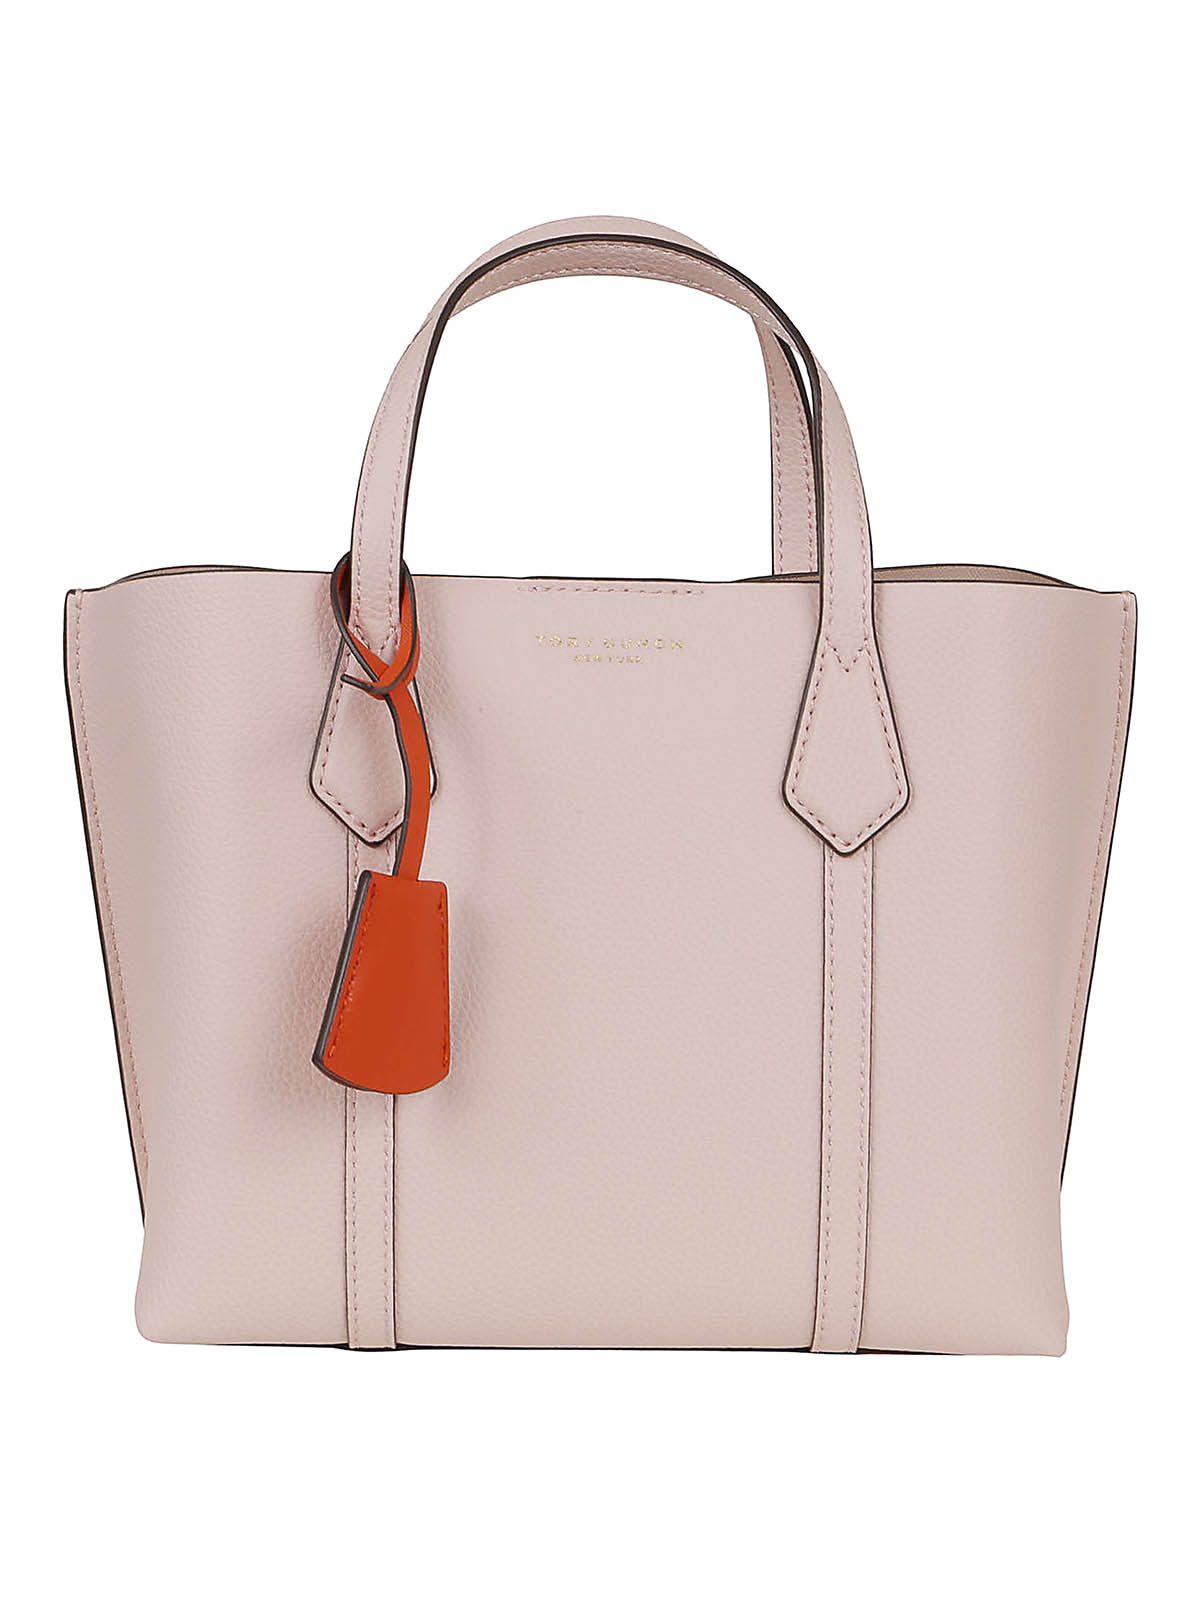 Tory Burch Mini Perry Tote Bag In Shell Pink